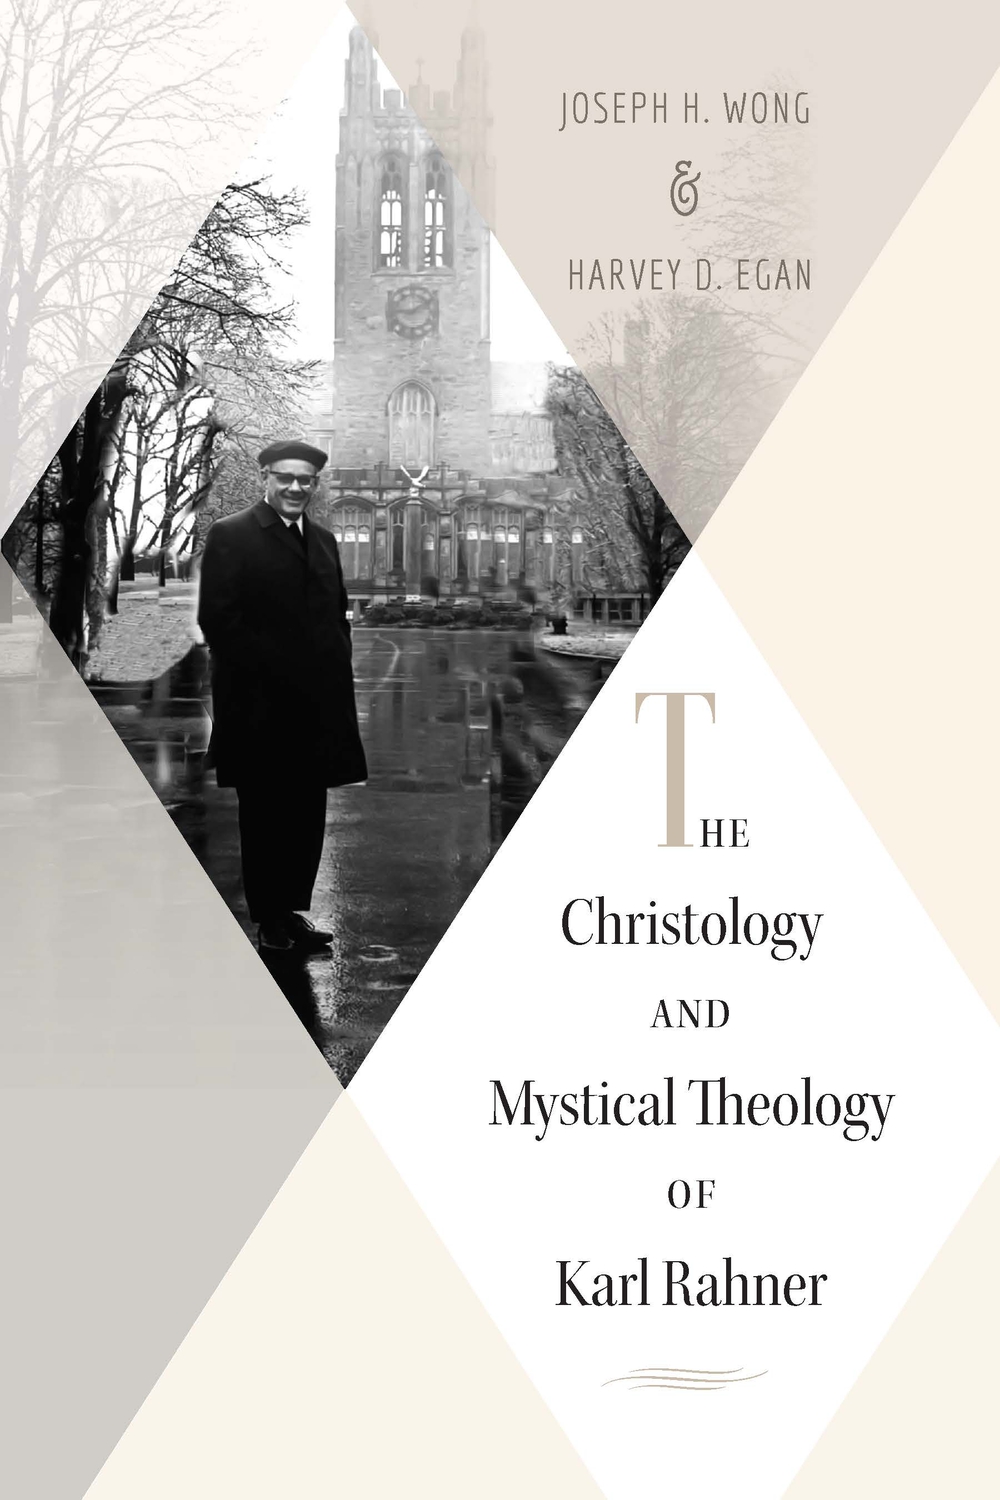 The Christology and Mystical Theology of Karl Rahner